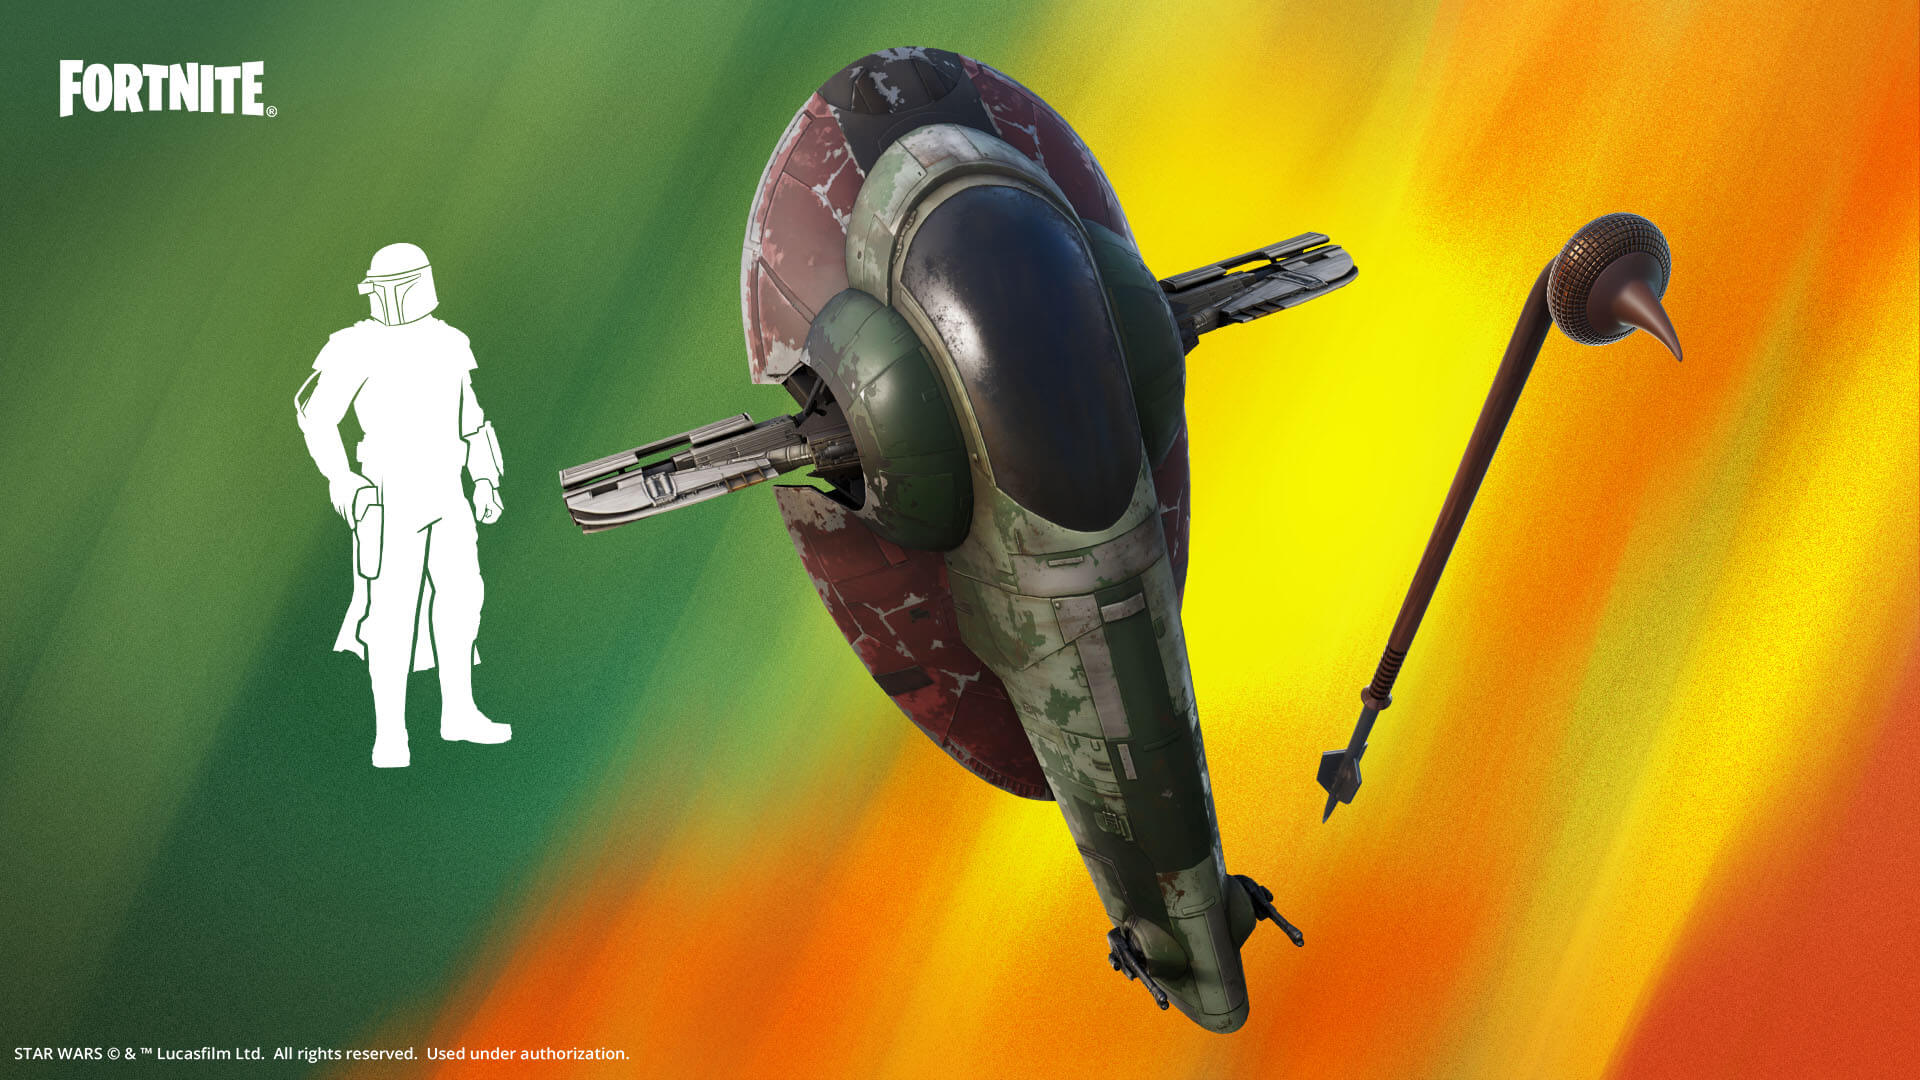 Boba Fett is now available in Fortnite